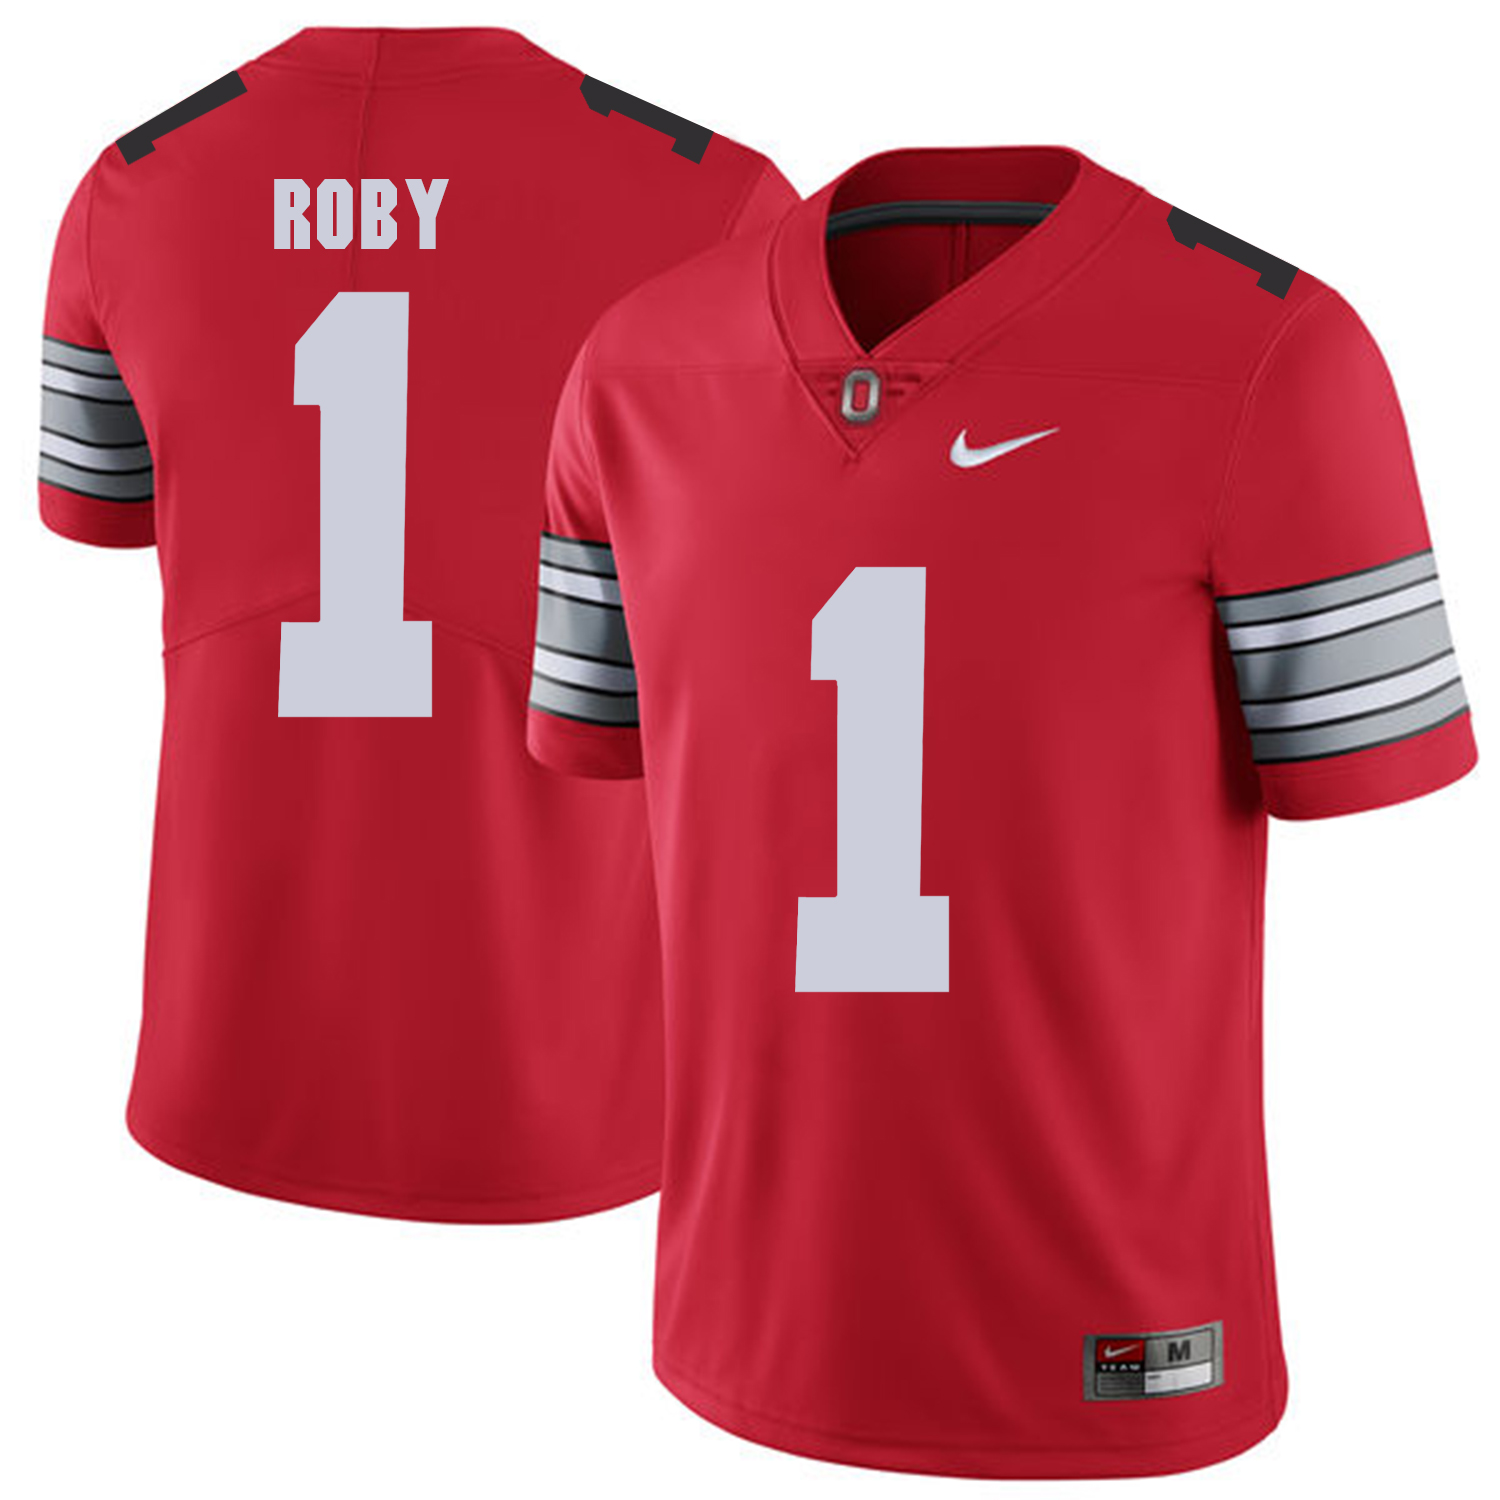 Men Ohio State 1 Roby Red Customized NCAA Jerseys